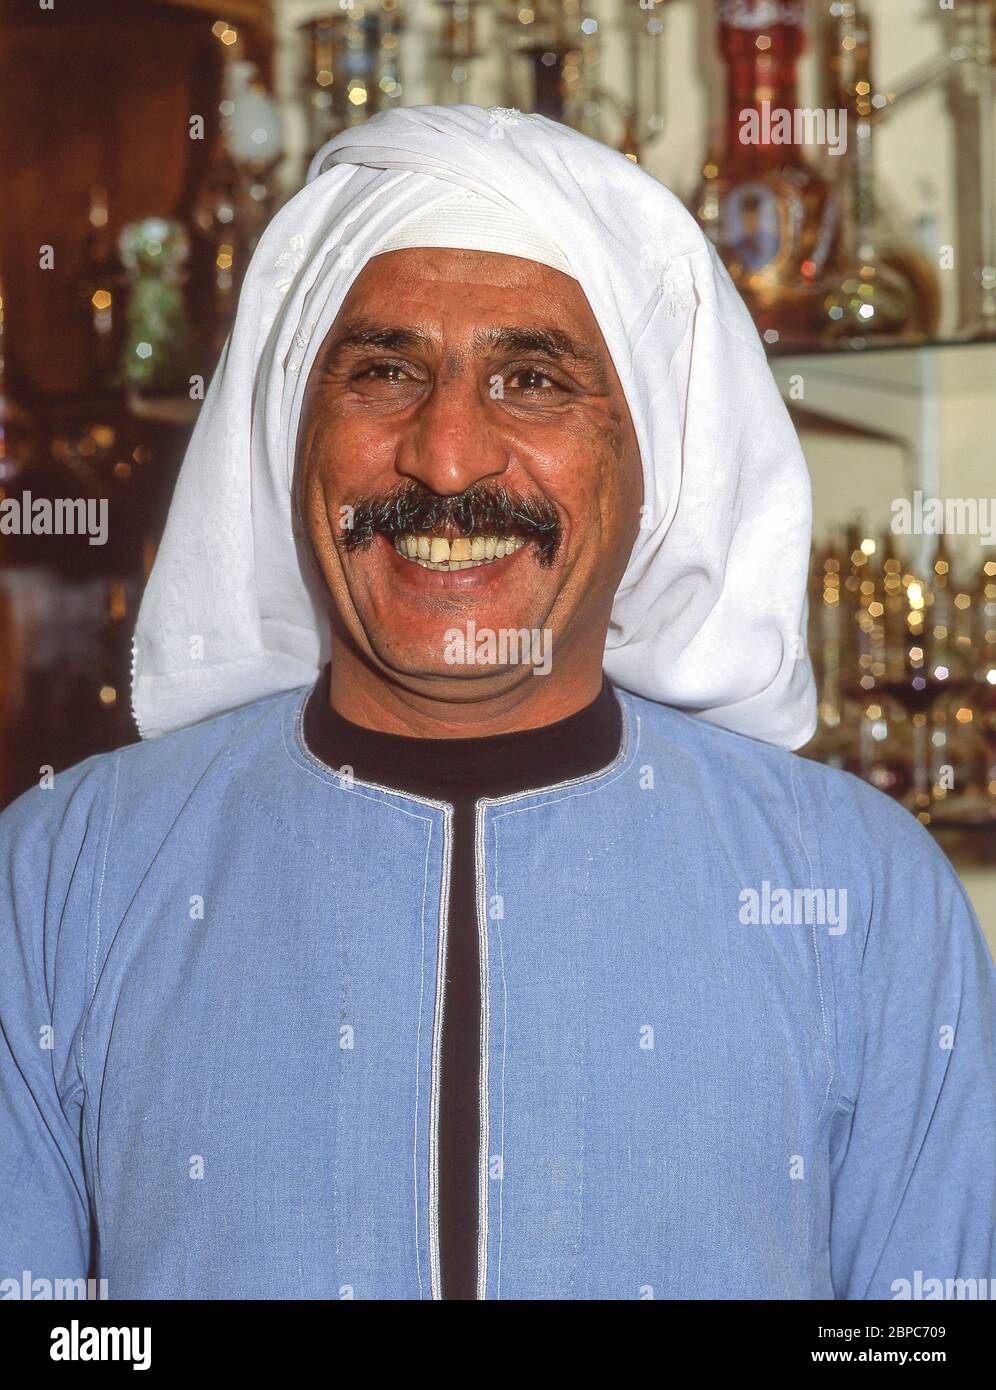 Souvenir shop owner in store, Luxor, Luxor Governorate, Republic of Egypt Stock Photo